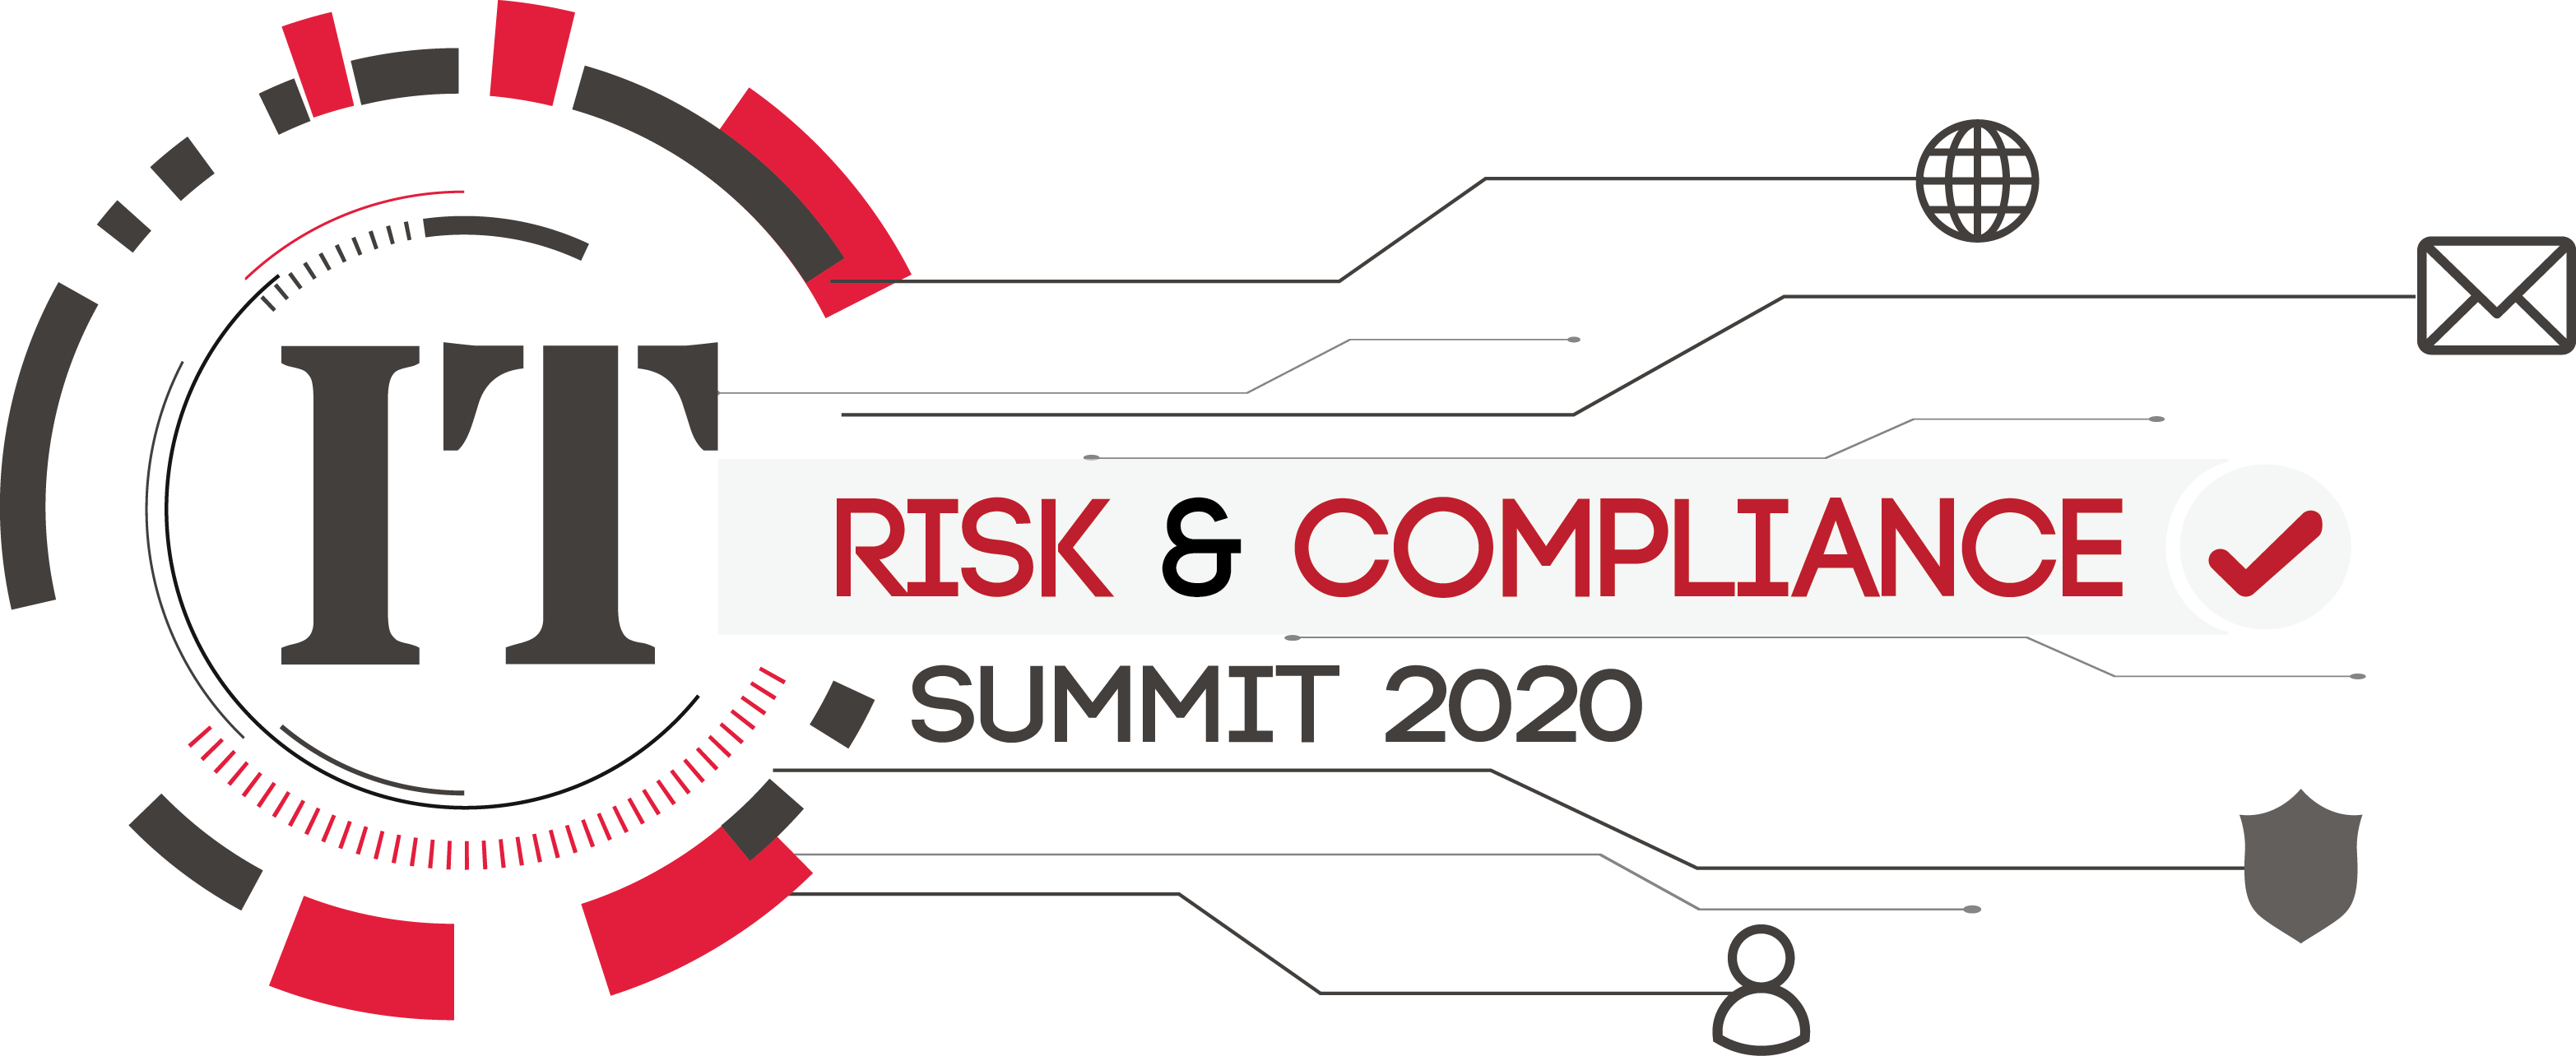 it risk and compliance summit 2020 logo